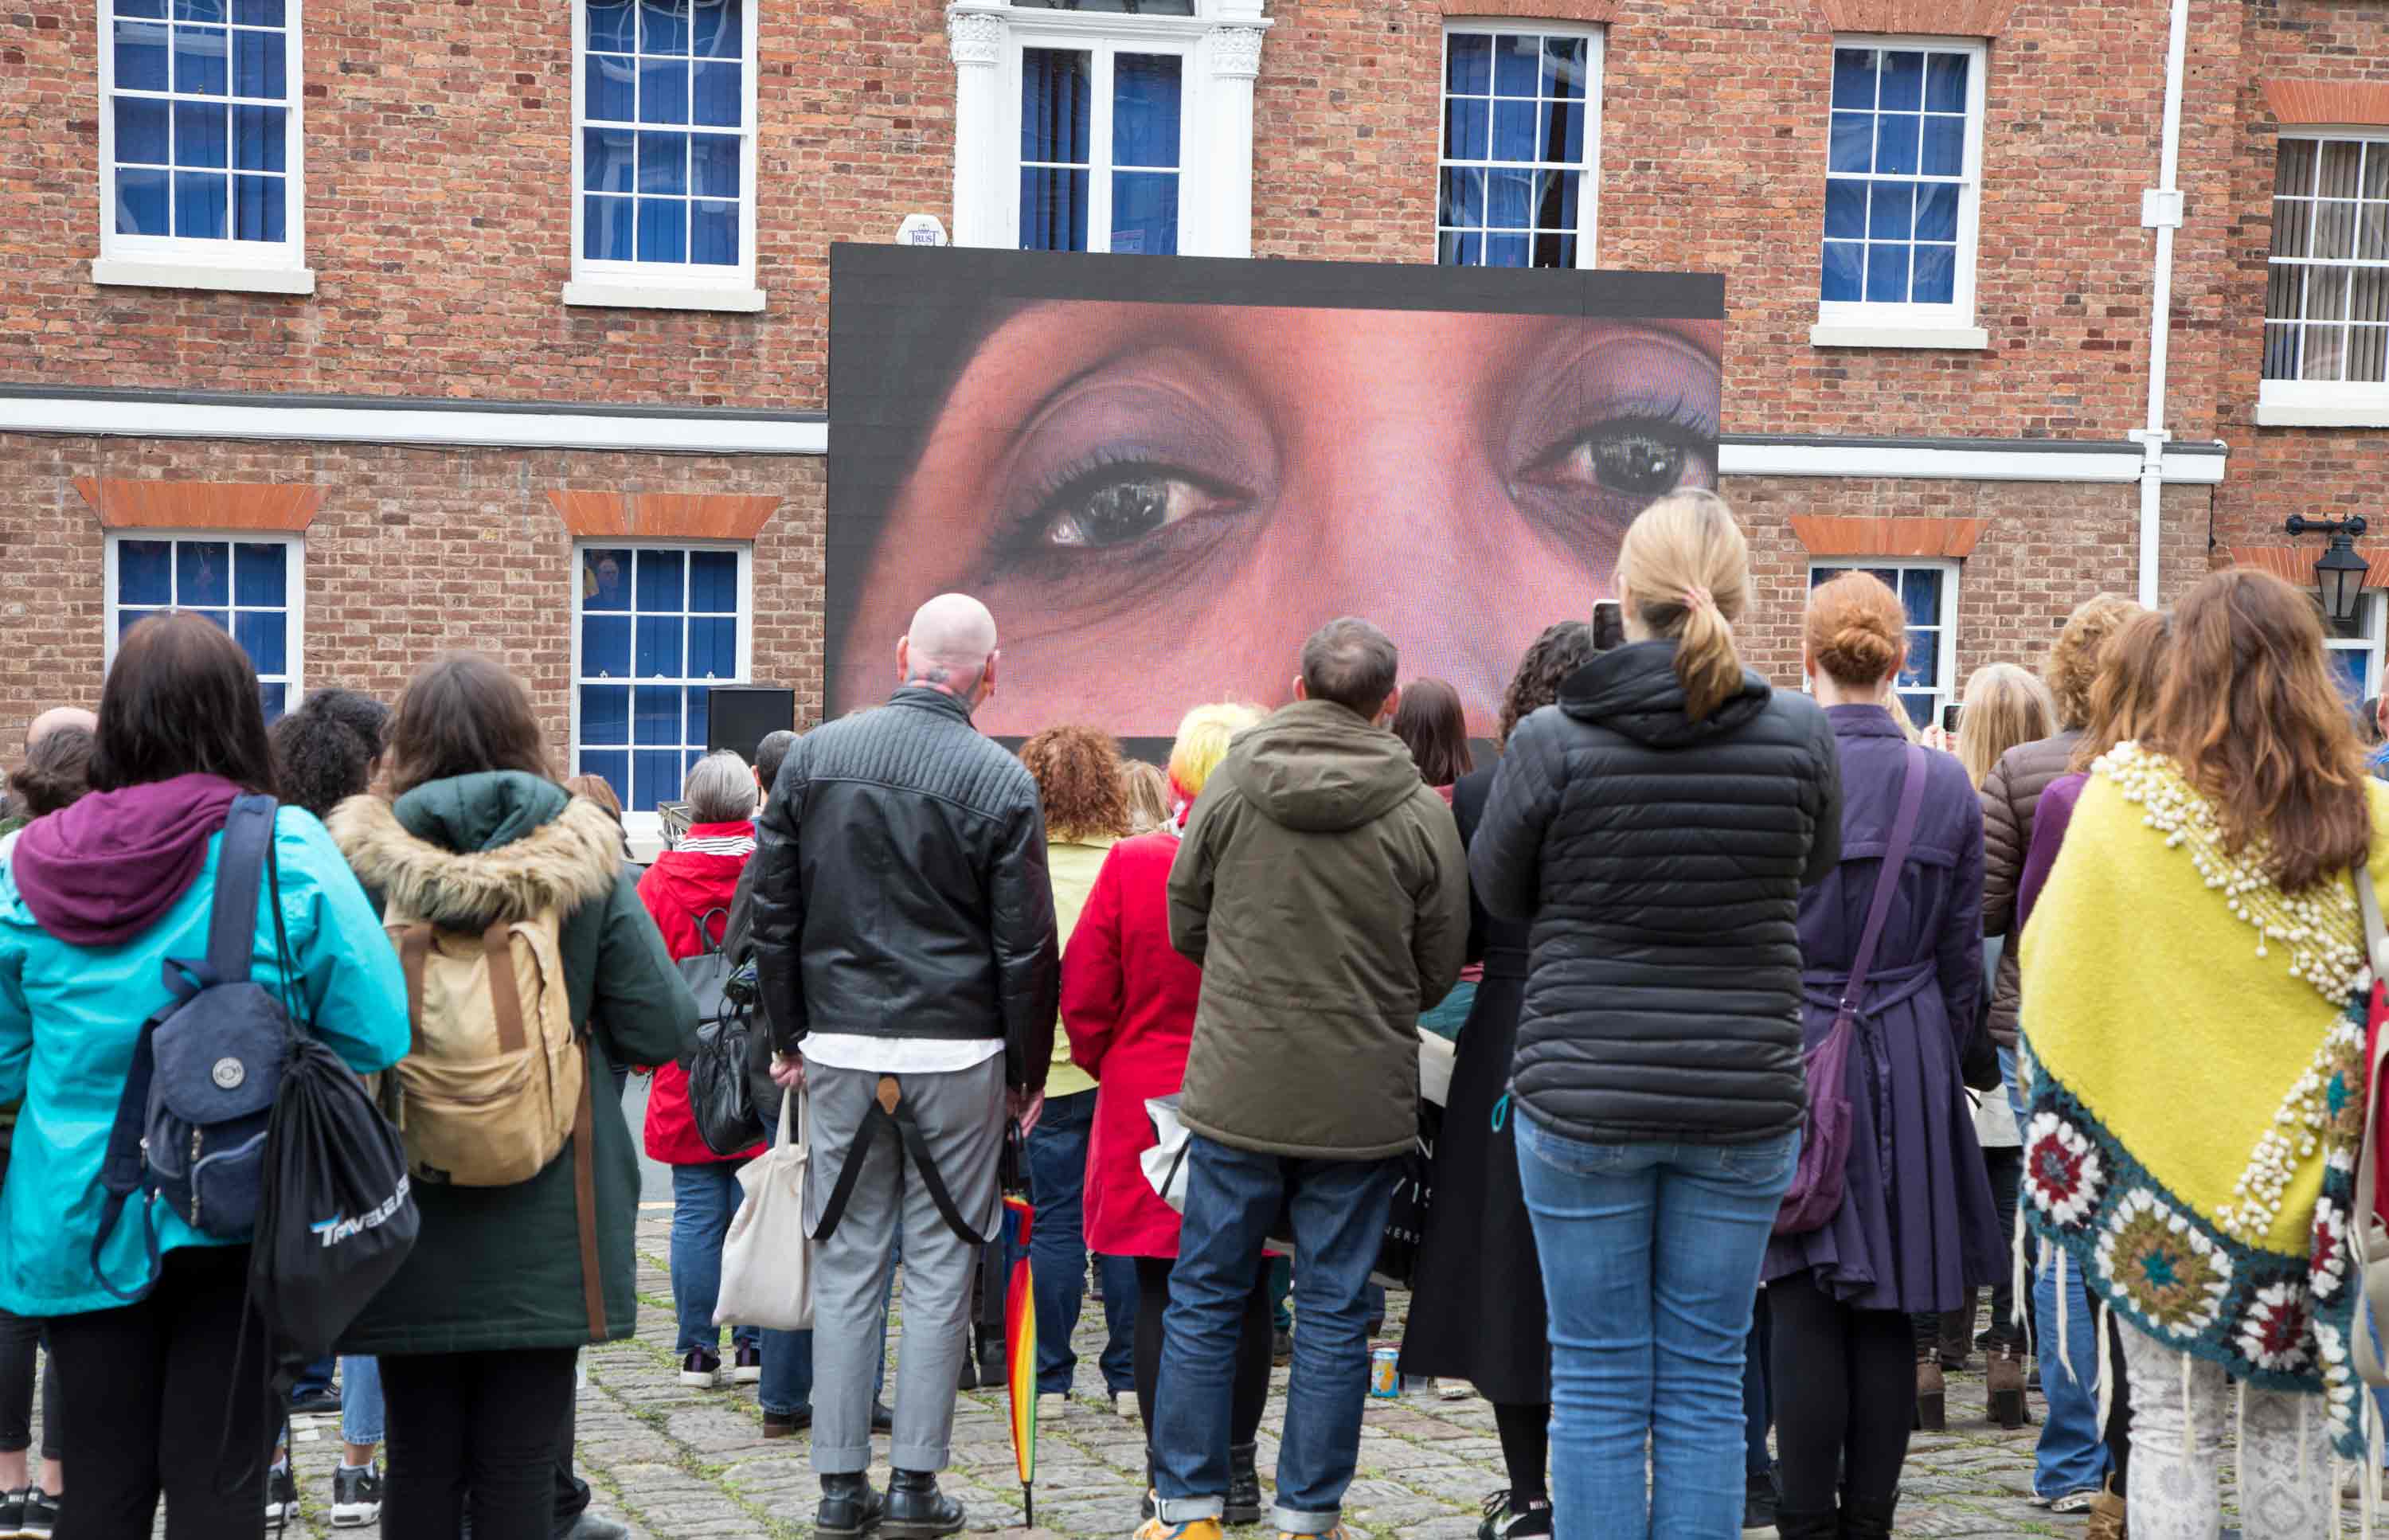 Chloë Brown's 'A Soft Rebellion in Paradise' is screened in Paradise Square, Sheffield